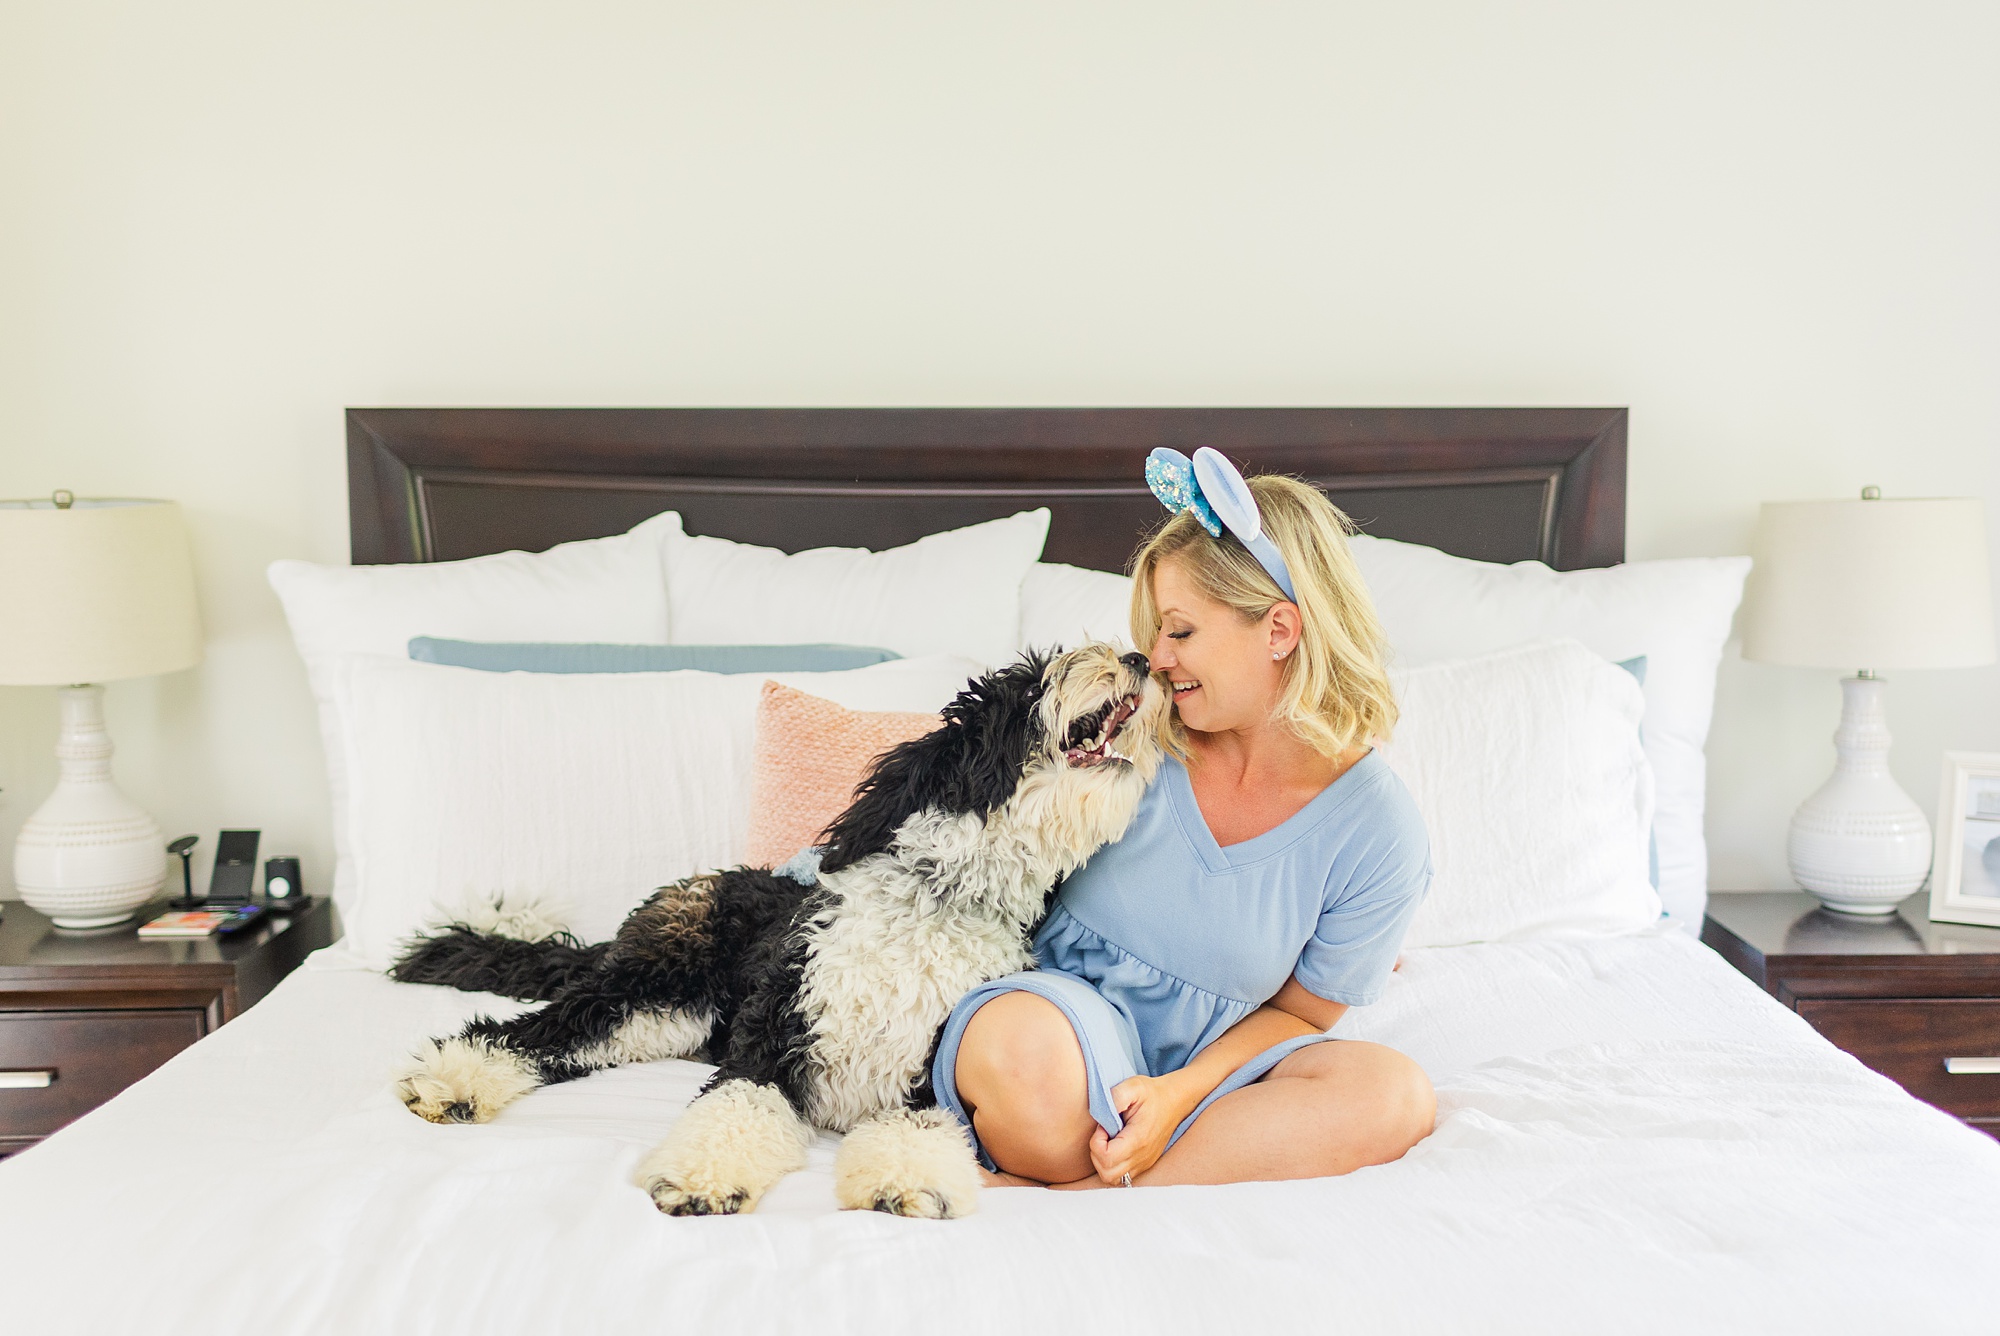 woman laughs with dog on bed wearing blue dress and Mickey Ears